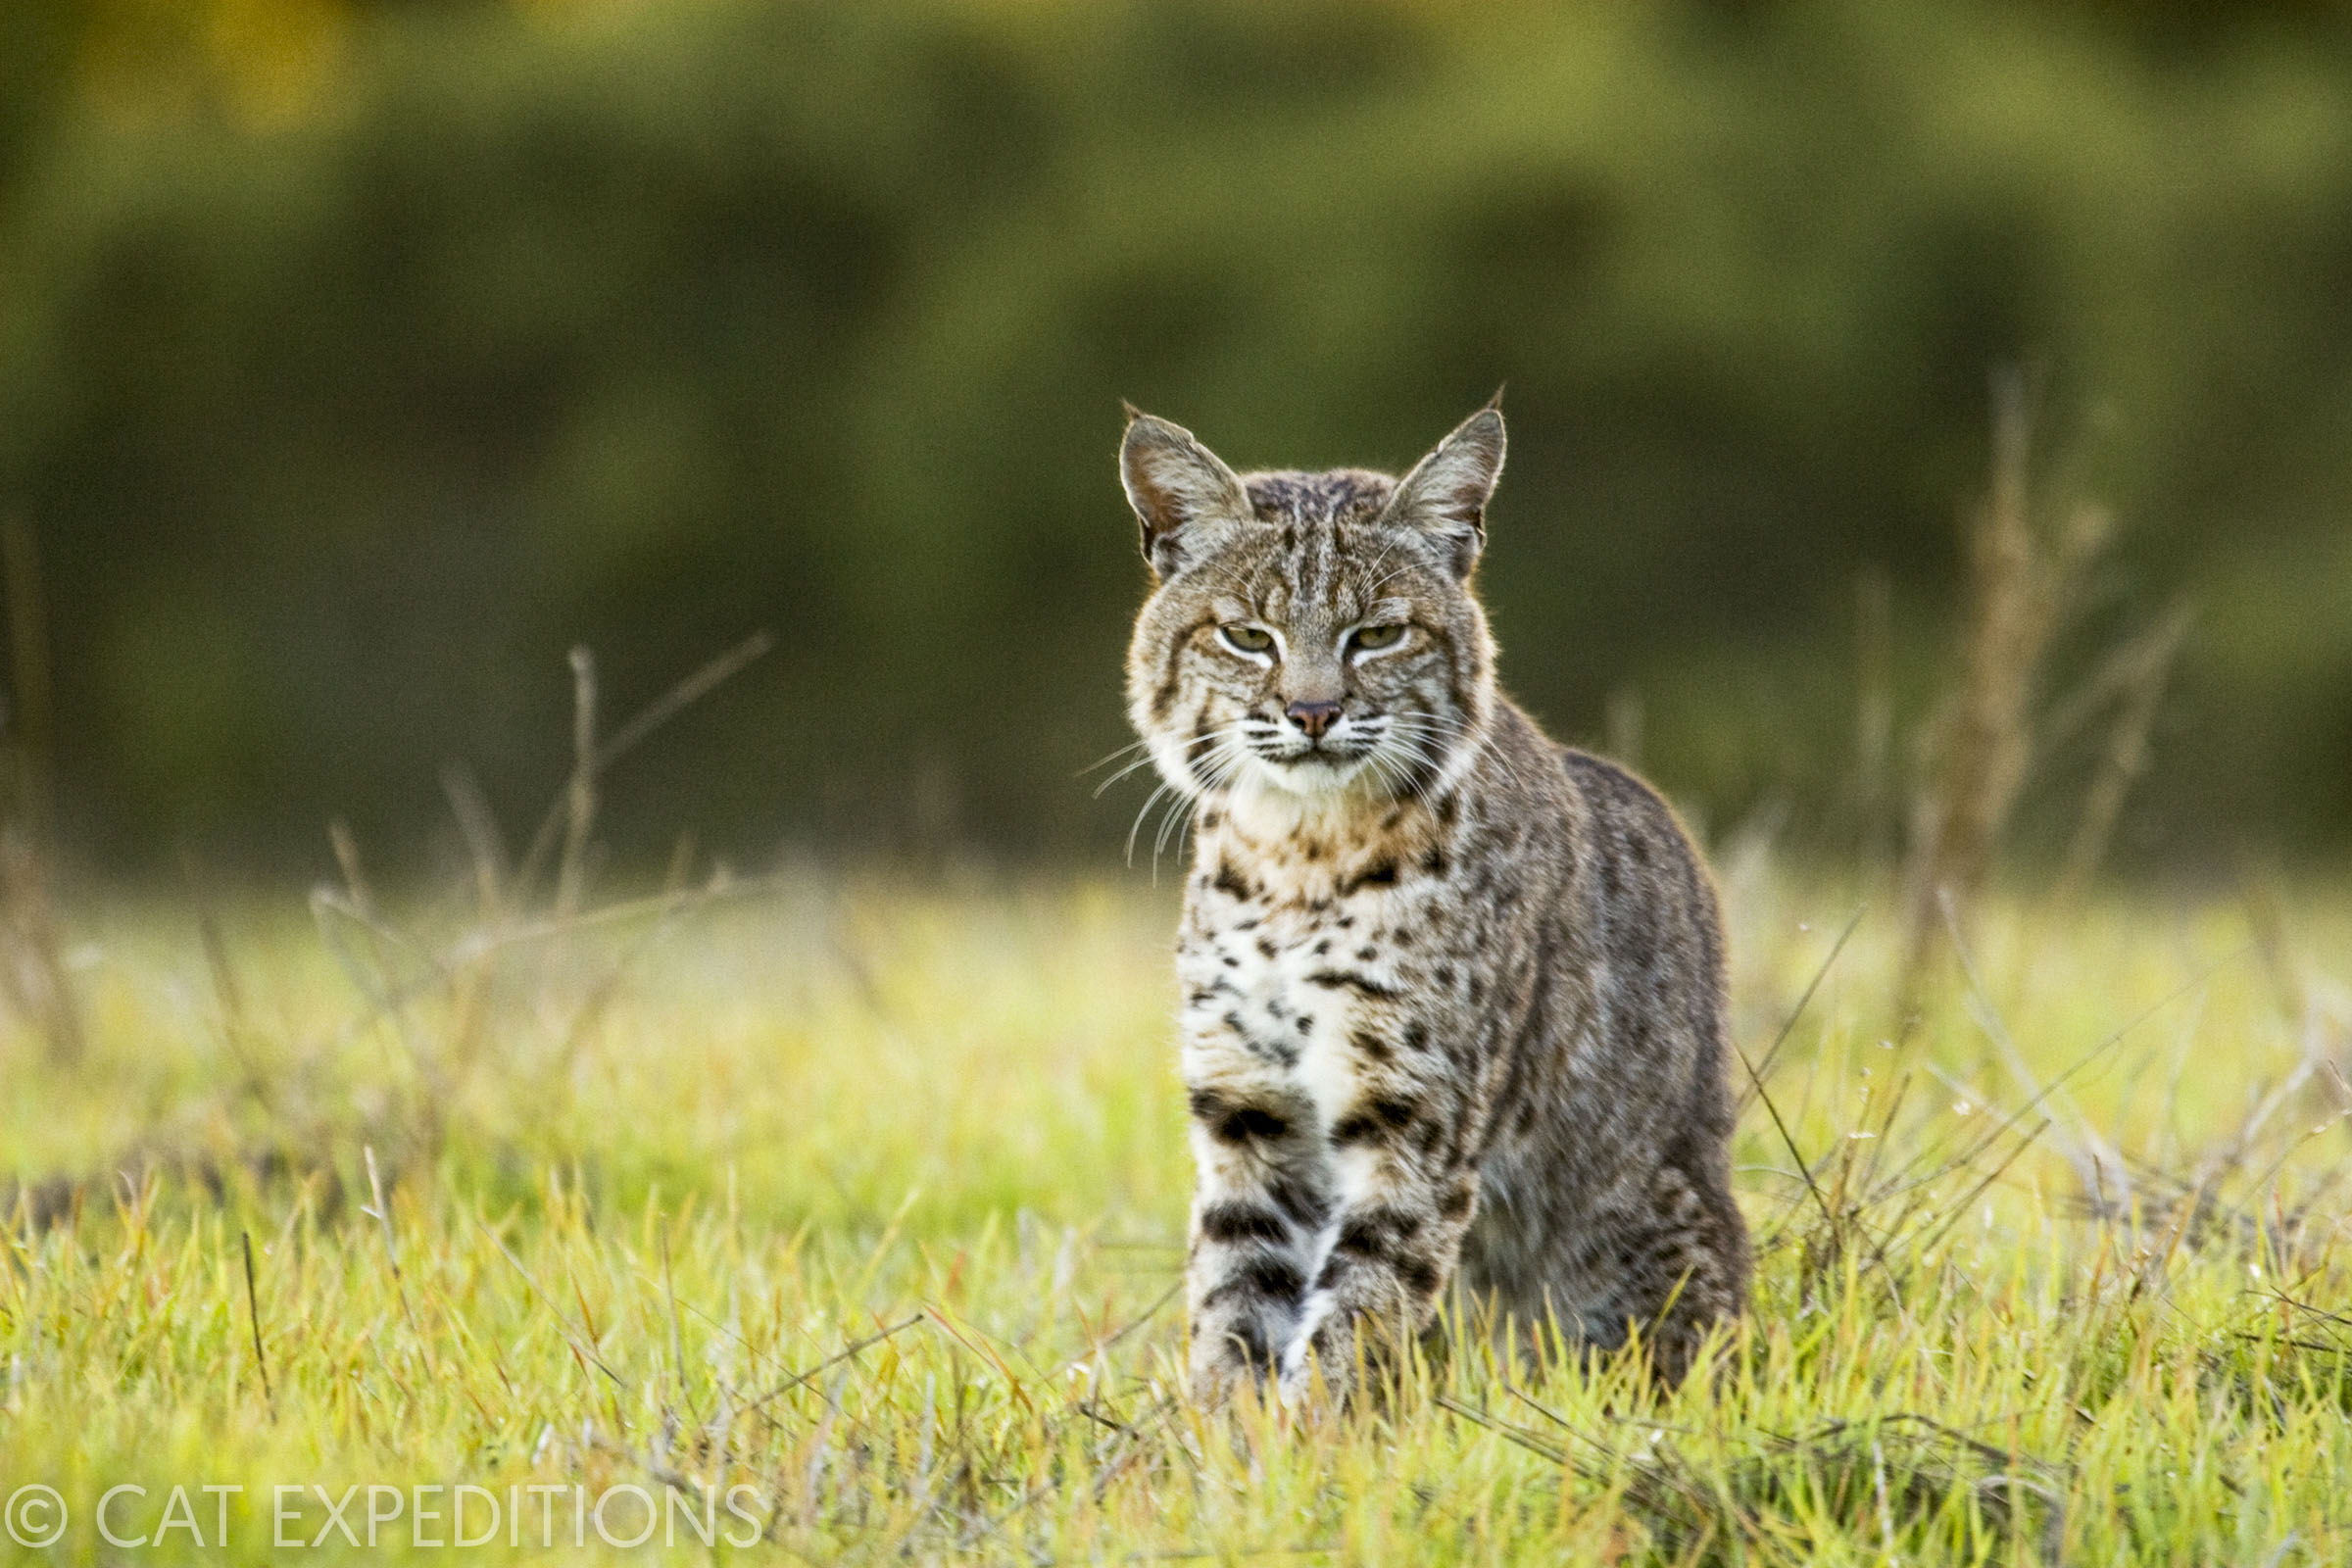 Bobcat Photo Tour in Northern California | Cat Expeditions